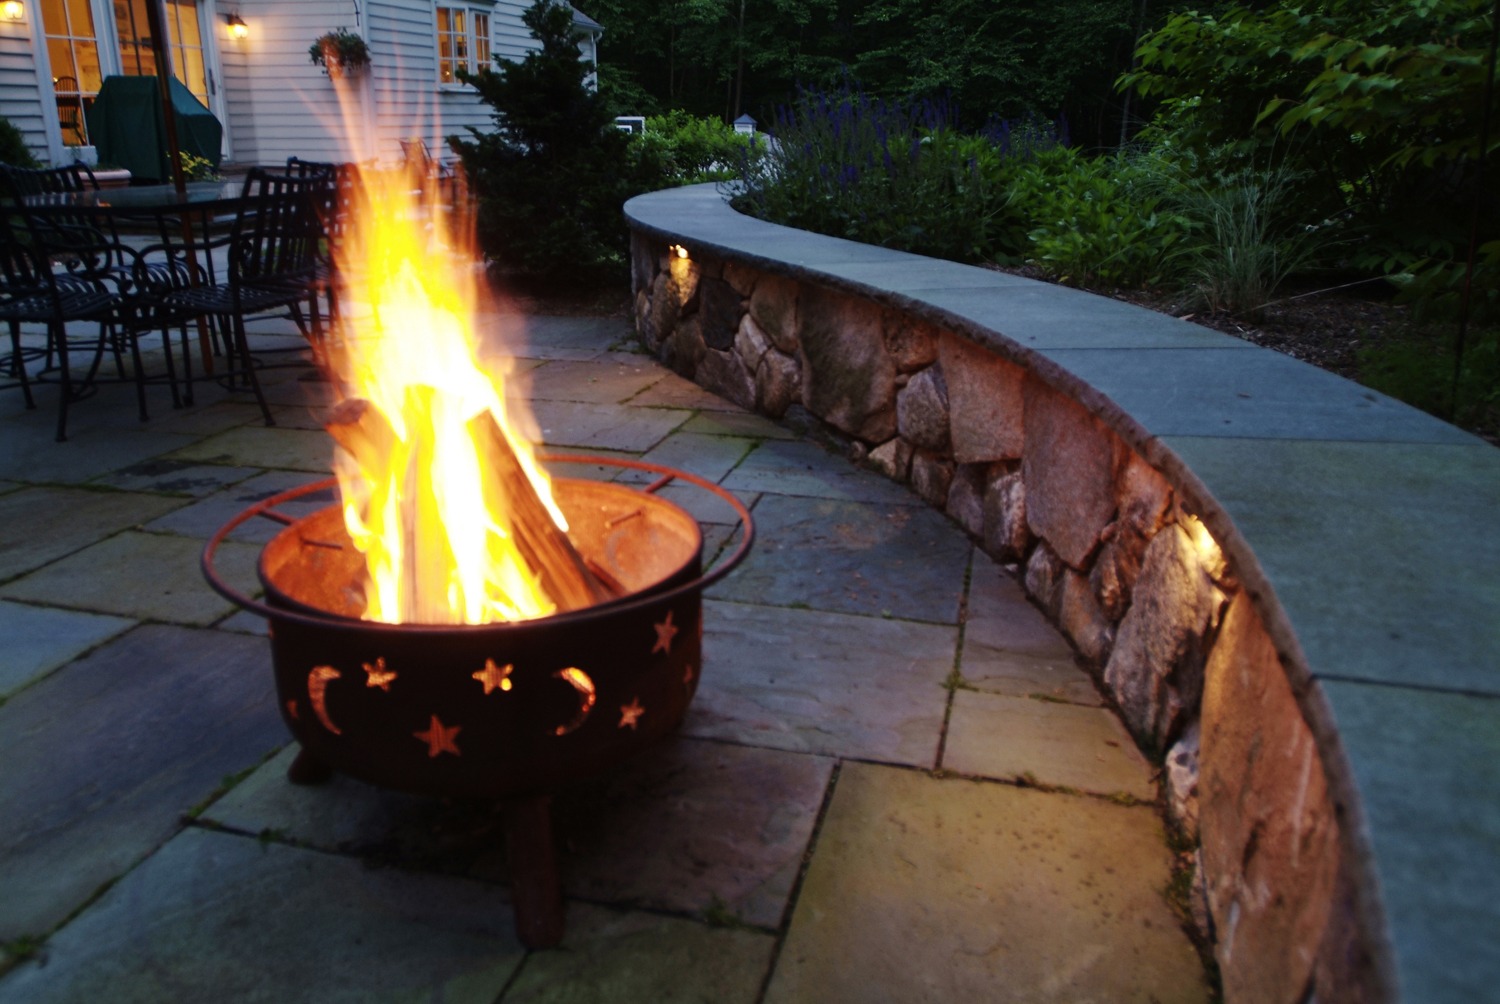 A metal fire pit with star cutouts, containing a blazing fire, placed on a stone patio near a stone curved wall, with a house in the background.